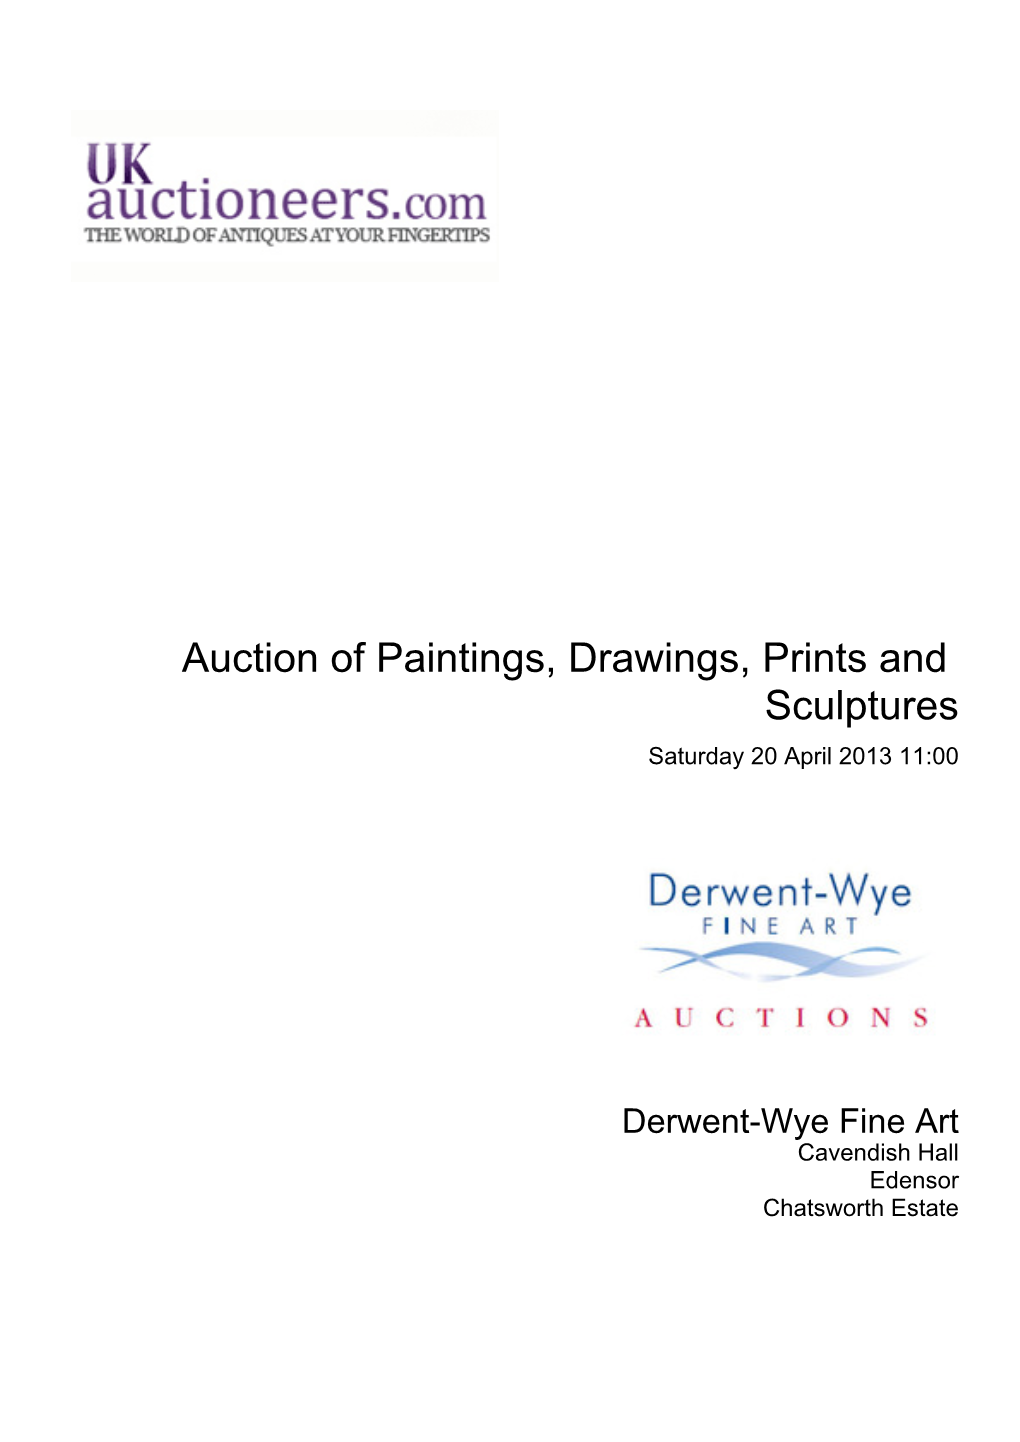 Auction of Paintings, Drawings, Prints and Sculptures Saturday 20 April 2013 11:00